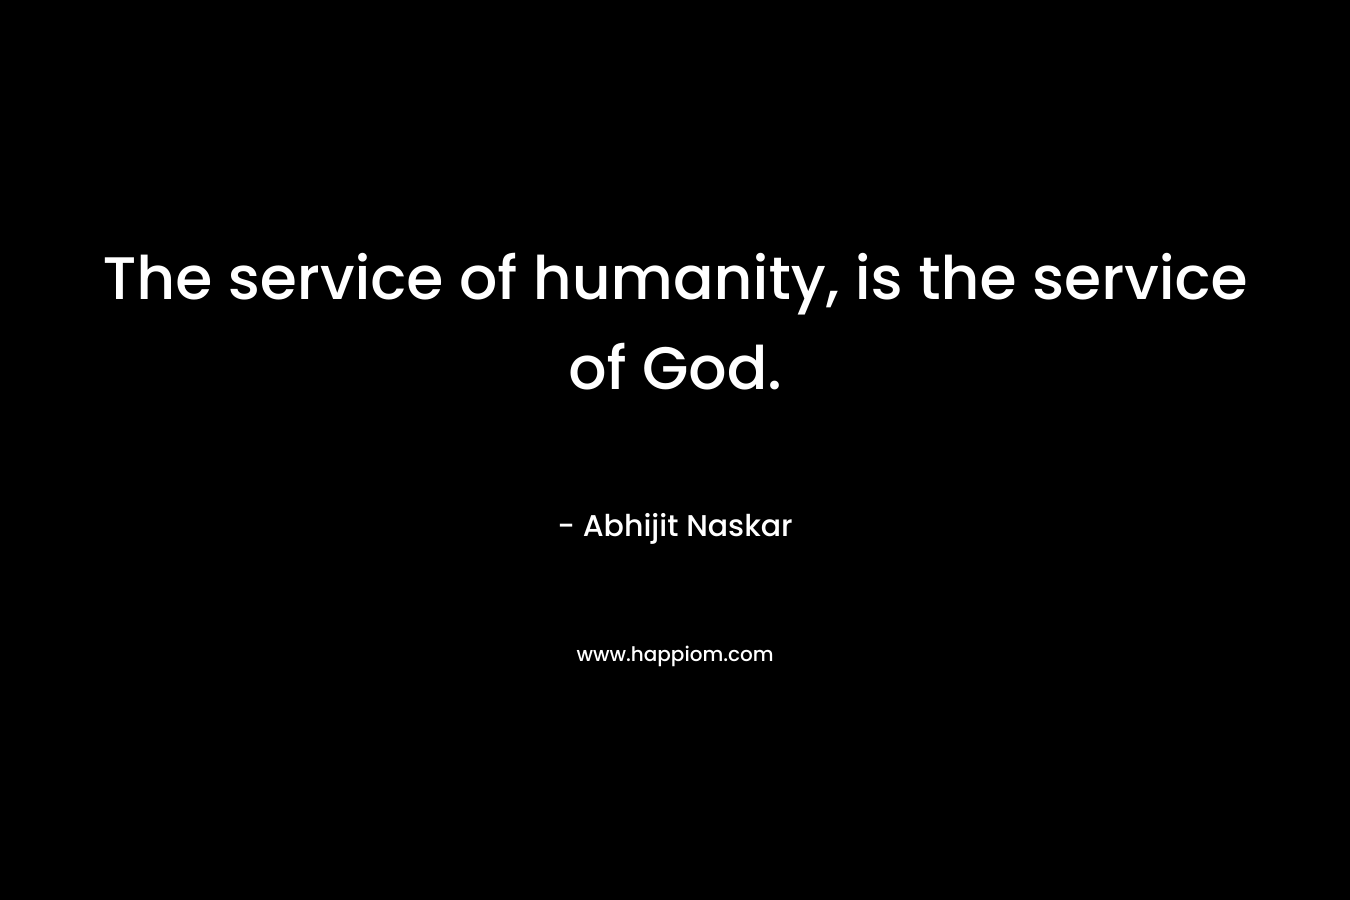 The service of humanity, is the service of God.